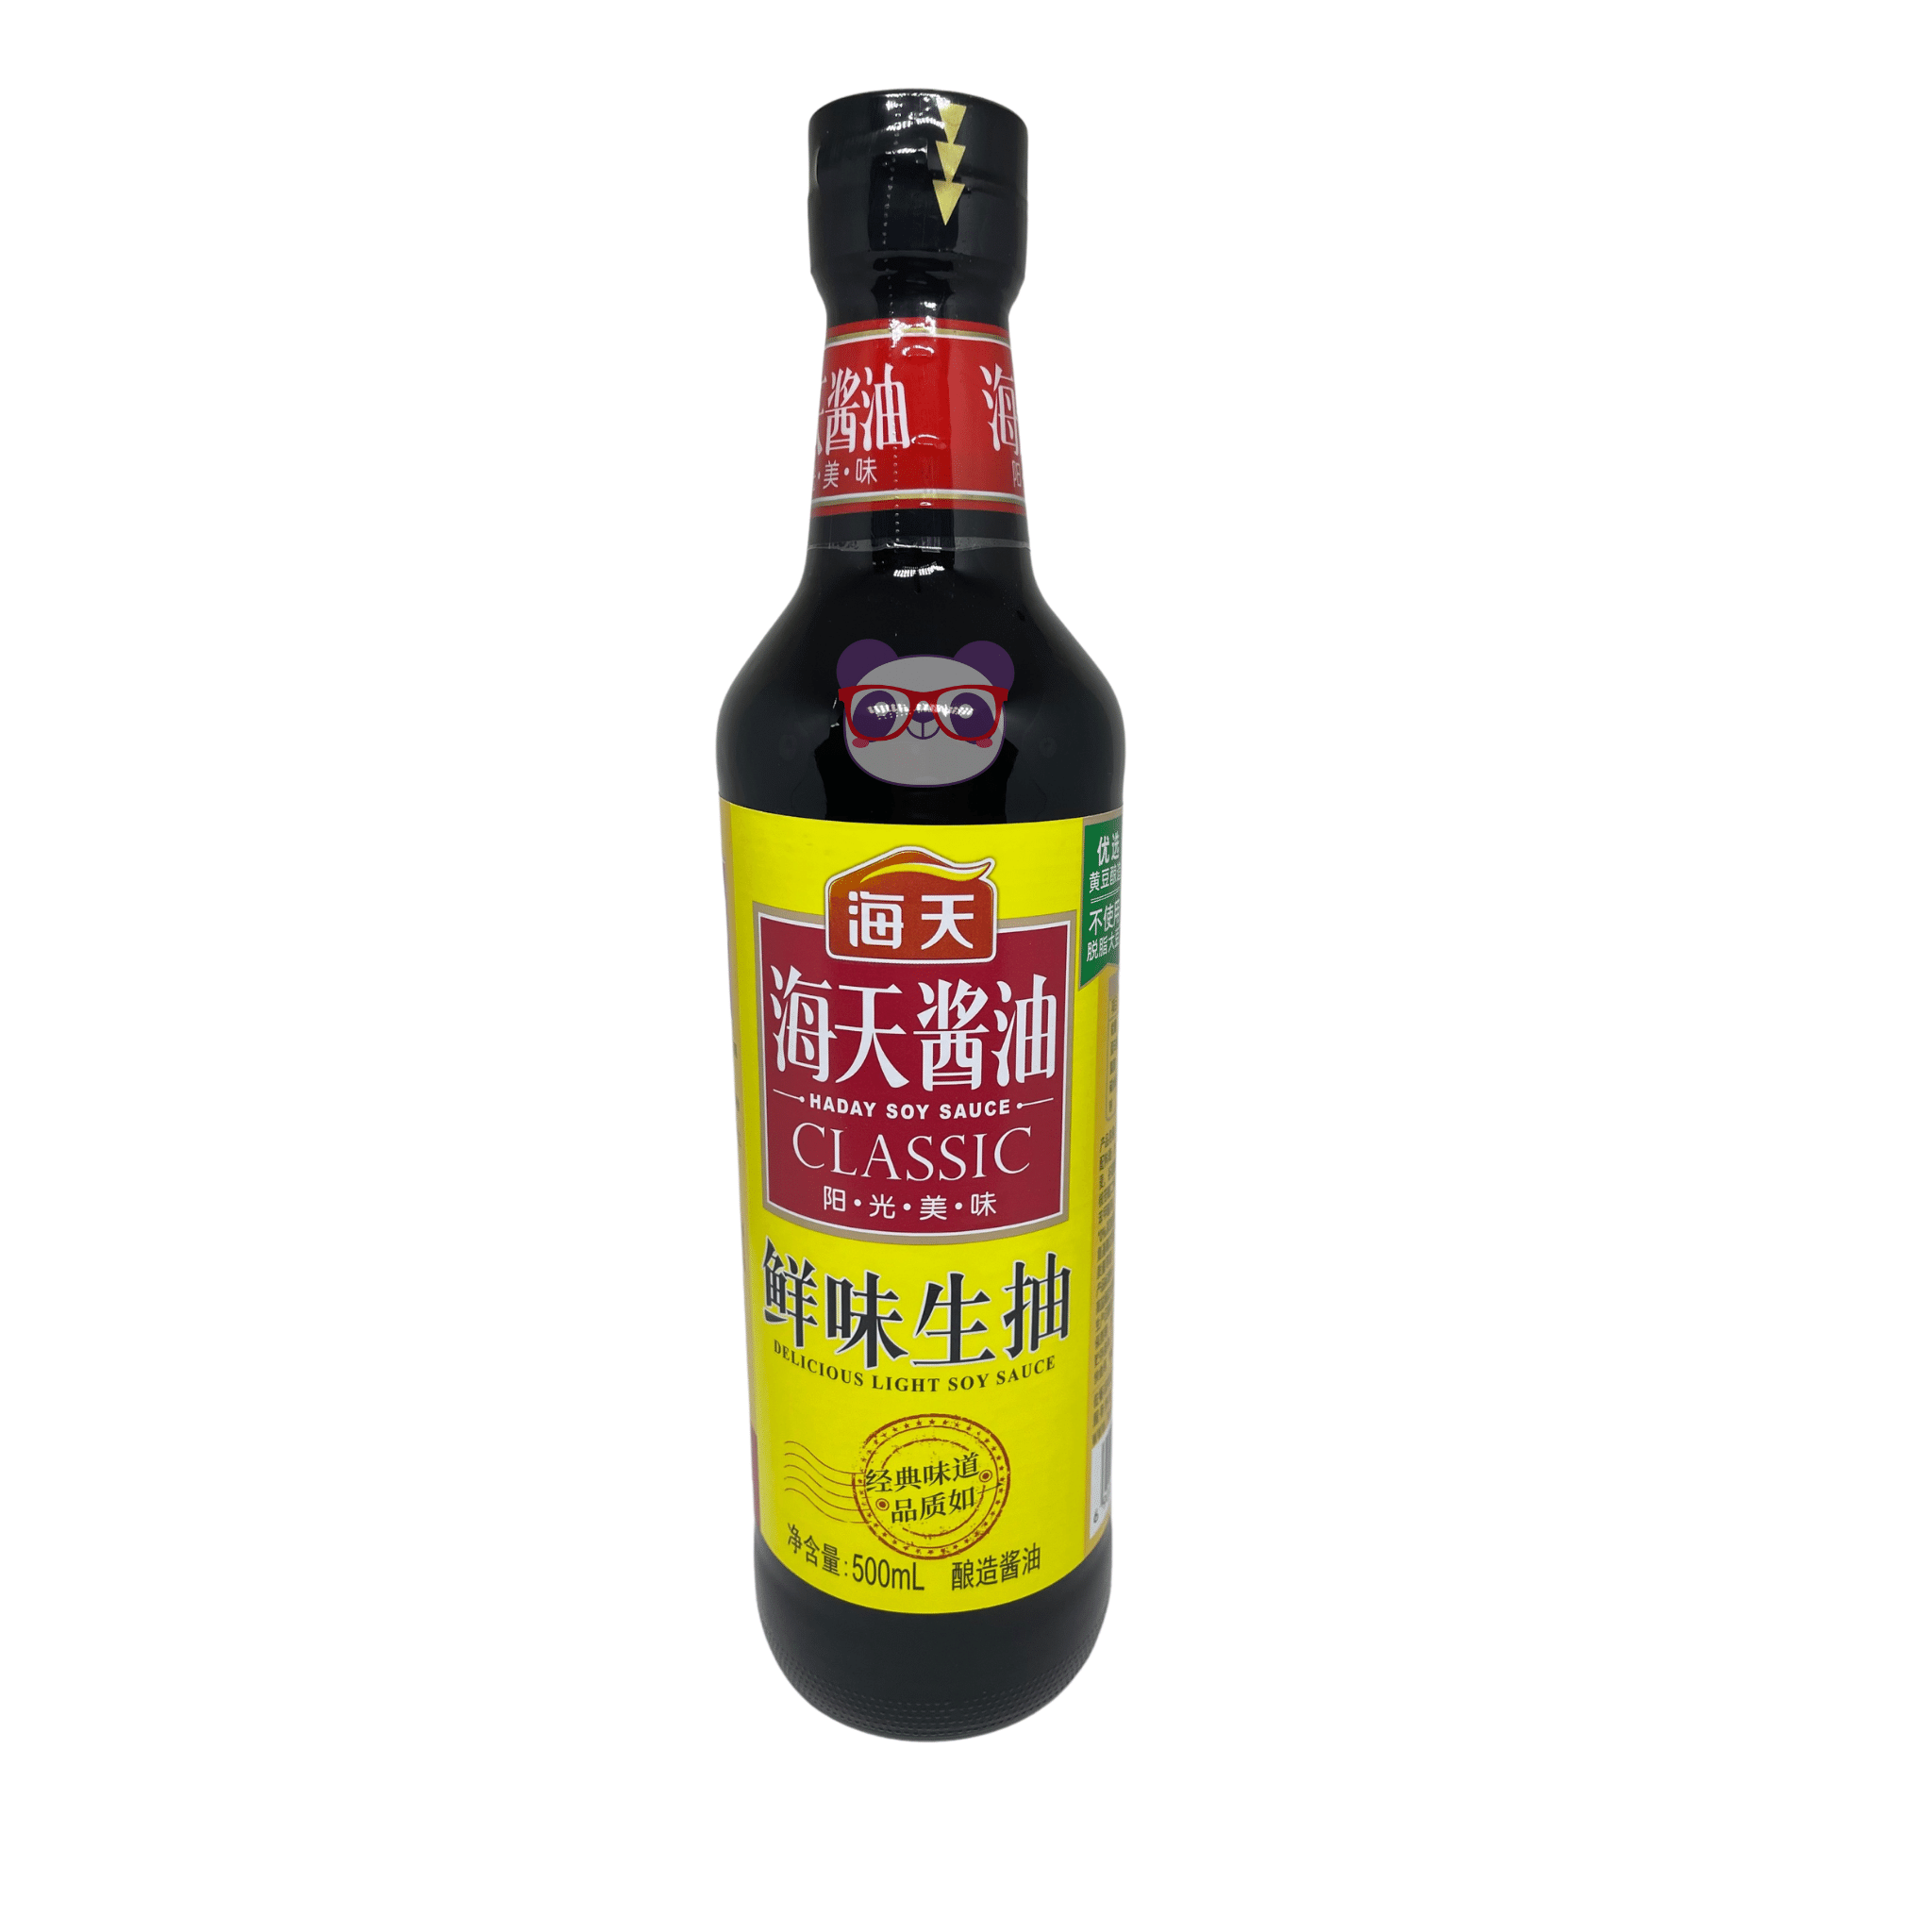 Haday Soy Sauce Classic (Delicious Light Soy Sauce) - Foshanshi 500ml - Mei Wei